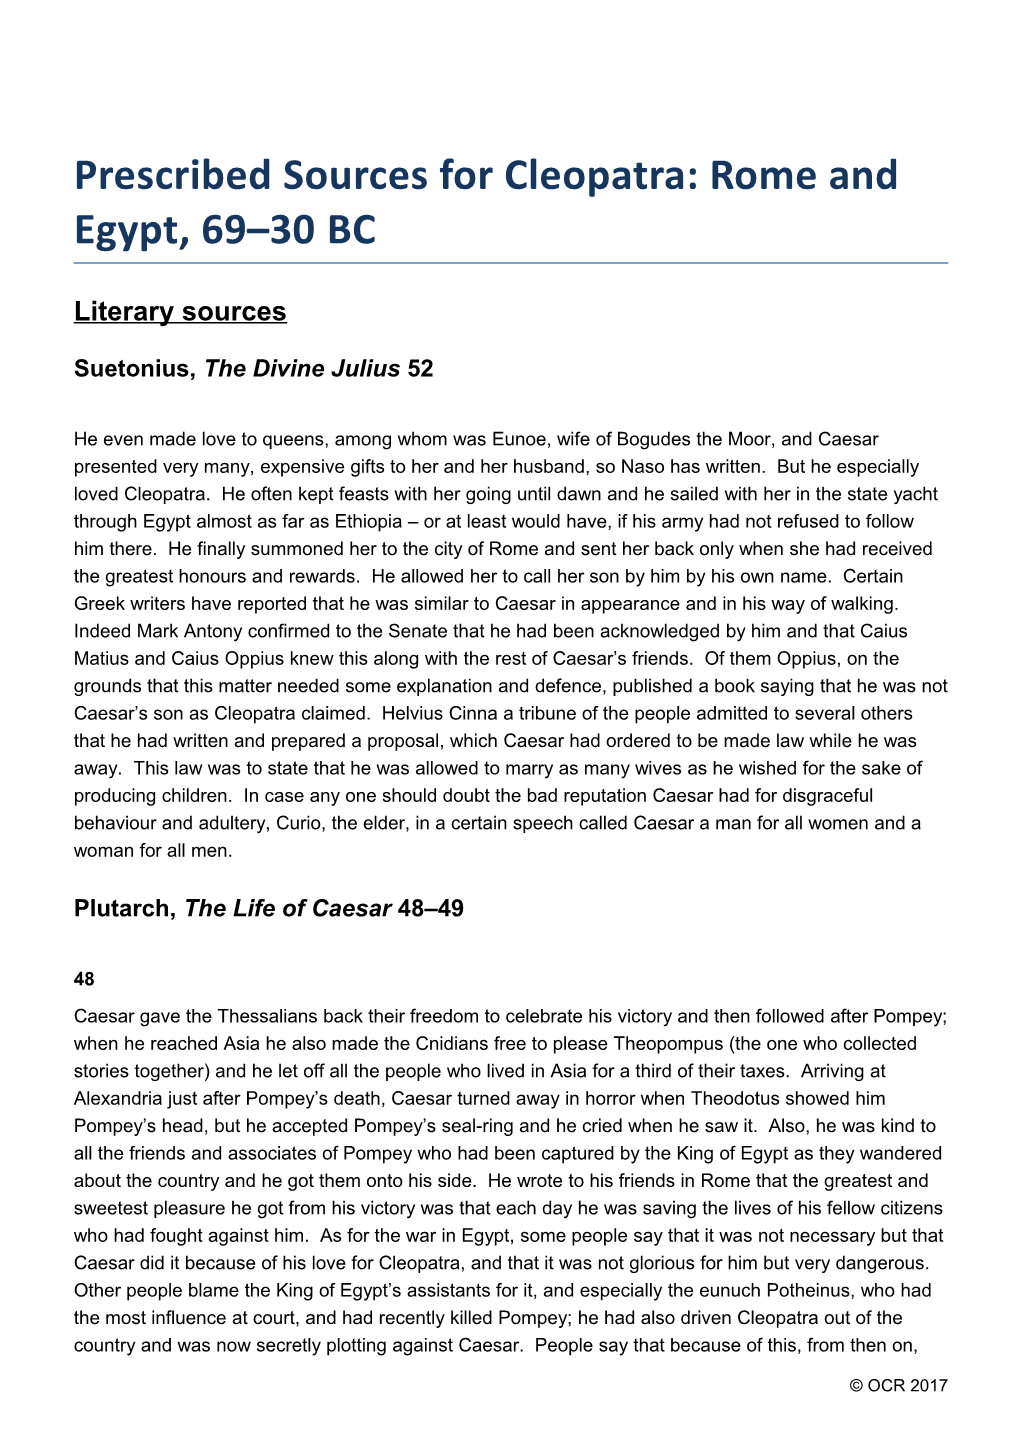 Cleopatra: Rome and Egypt, 69-30 BC Prescribed Sources